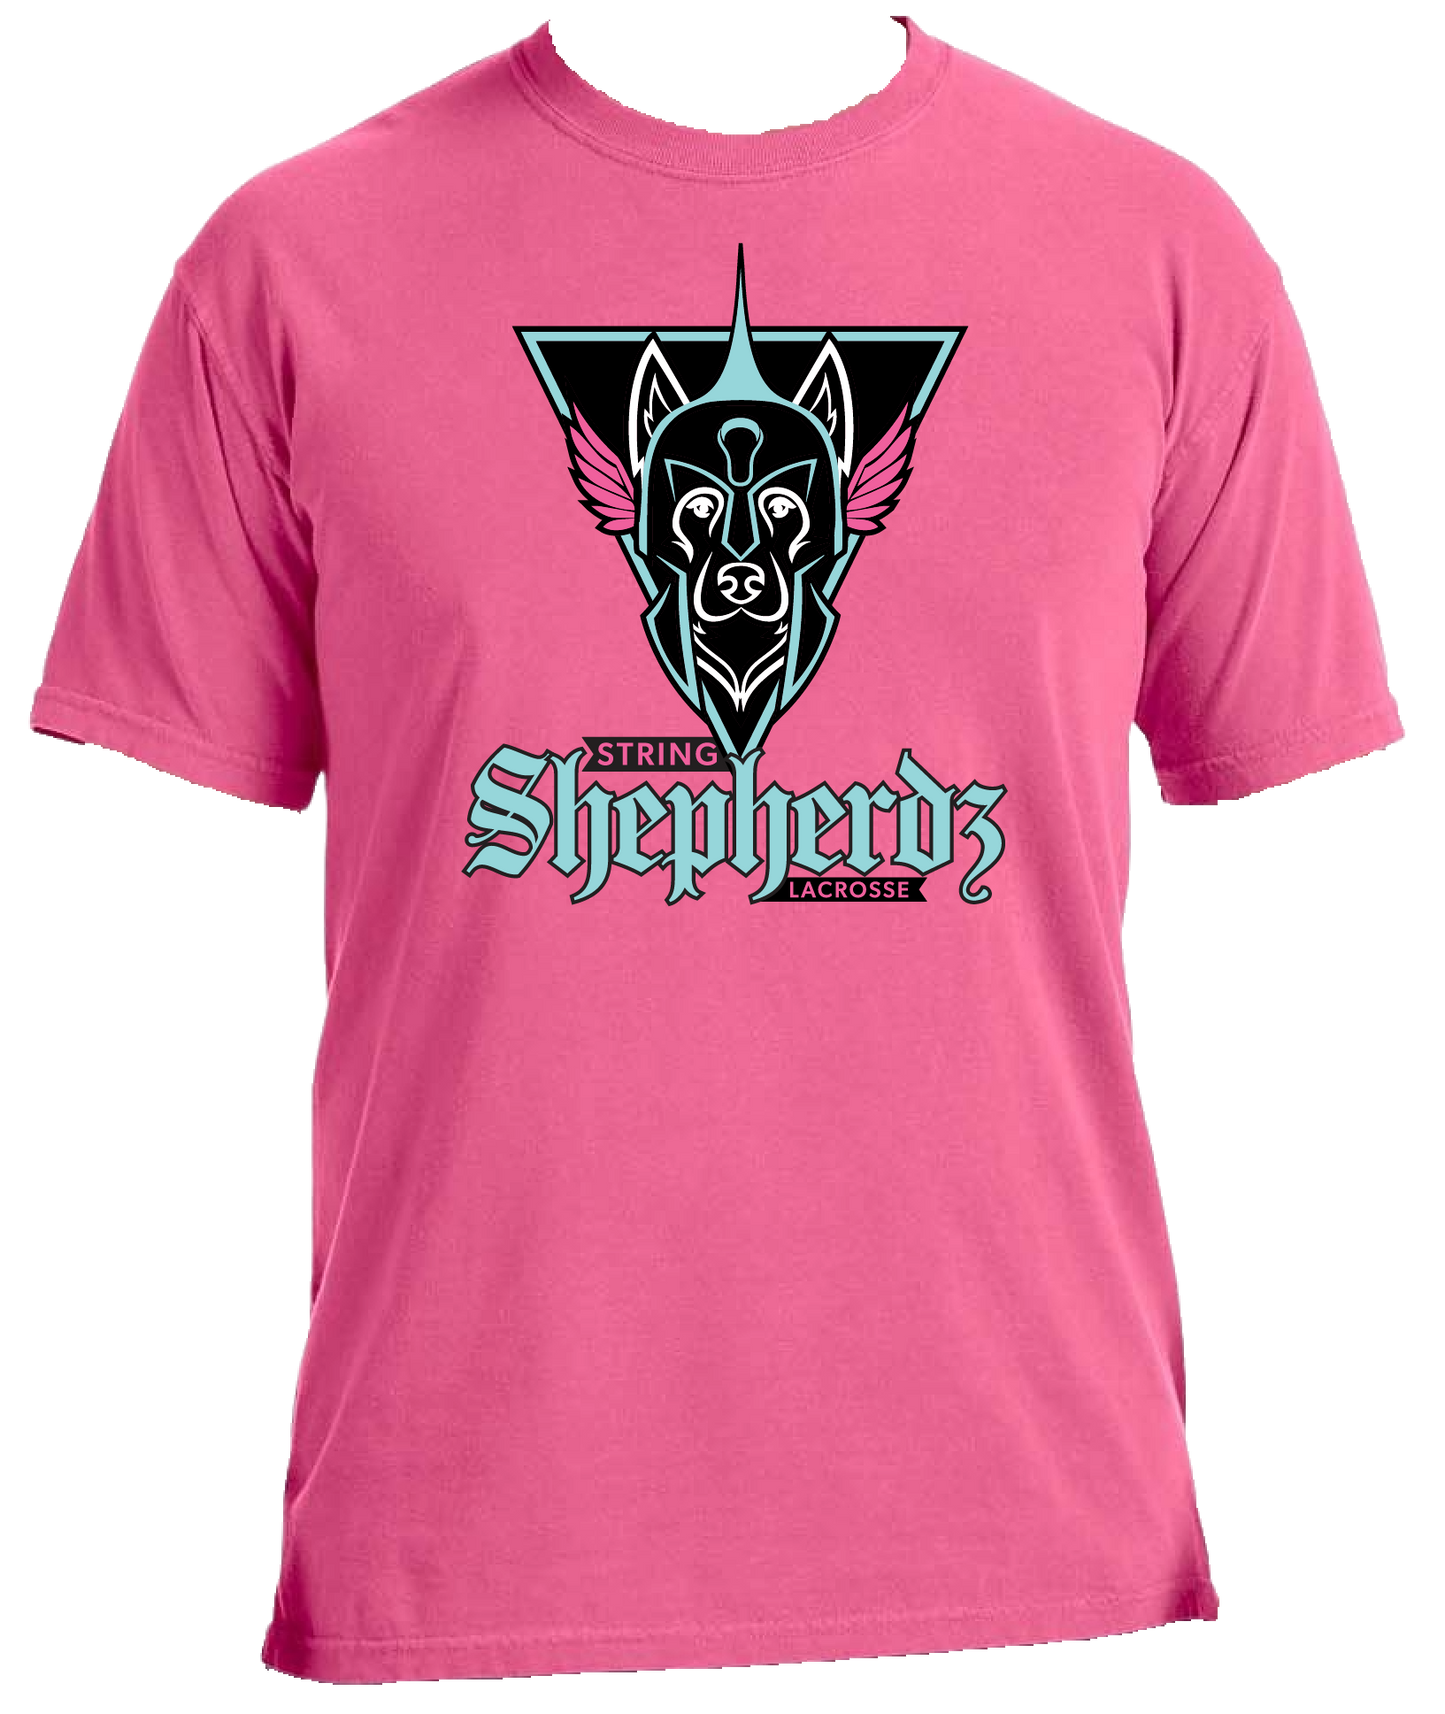 Sparty Armors Up - Pink